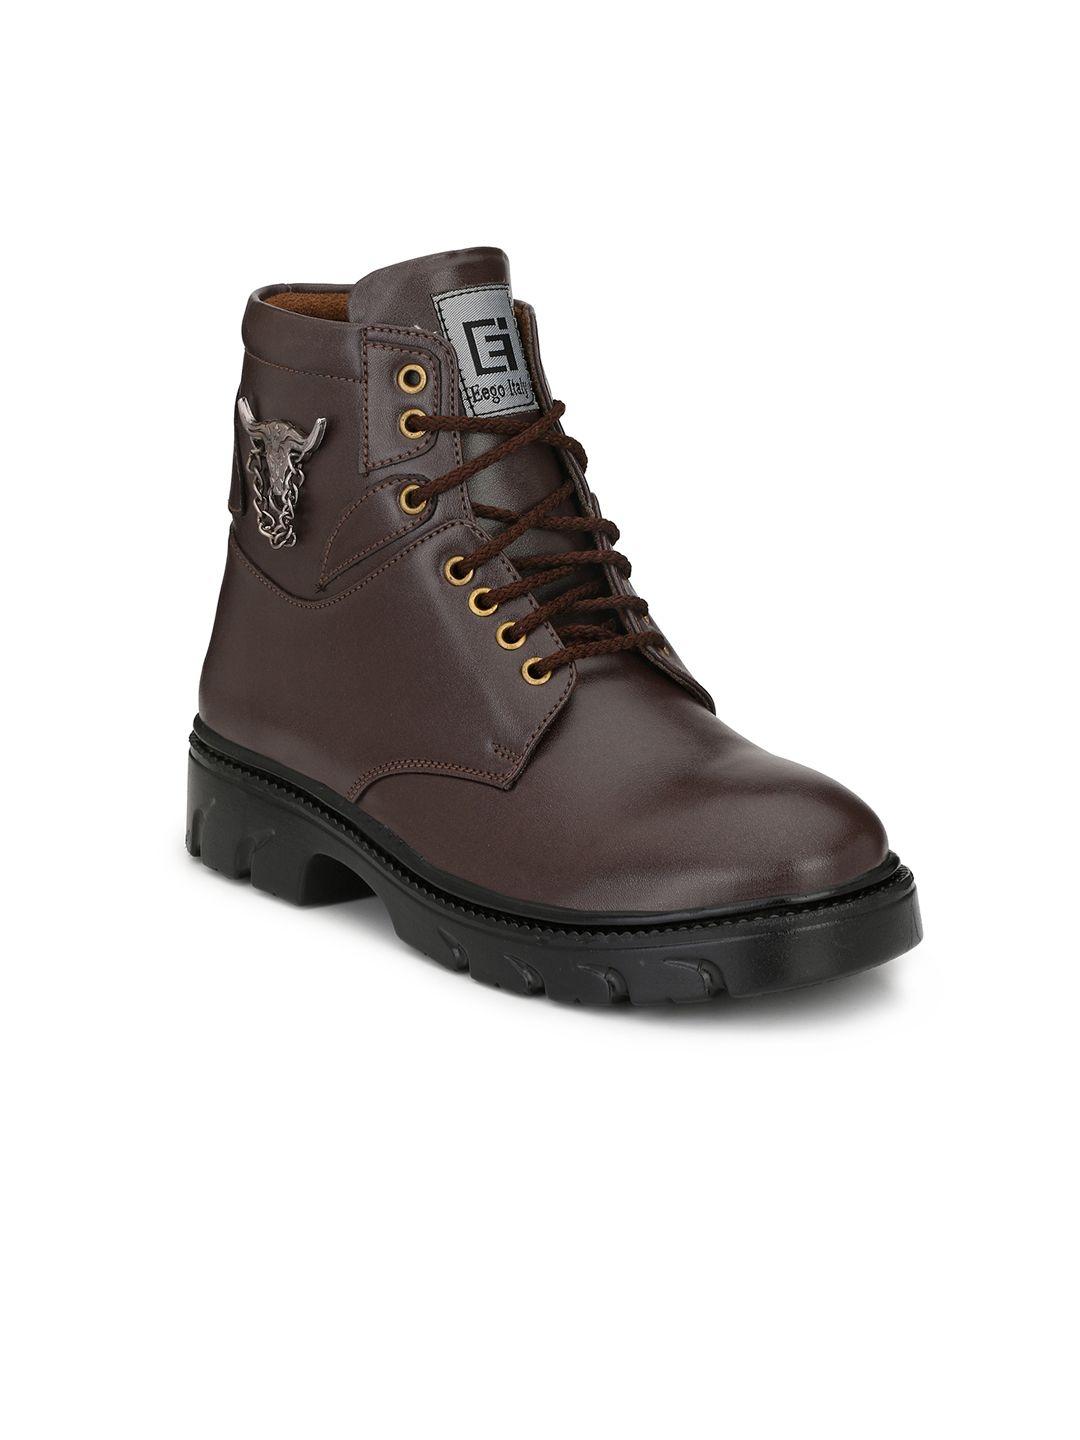 eego italy men brown solid synthetic mid-top flat boots